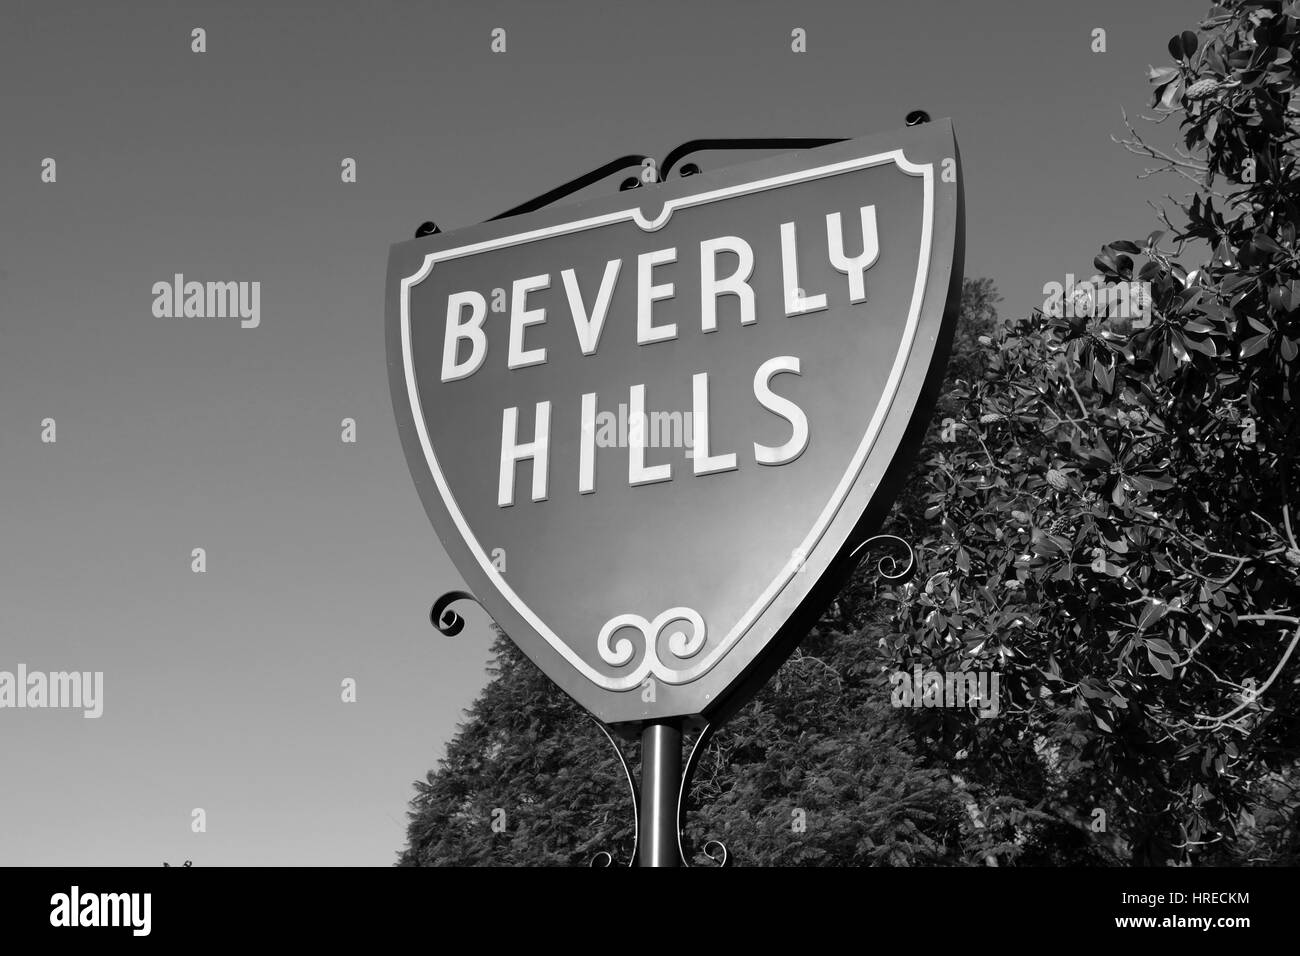 Beverly Hills, California, USA - September, 4th 2010:  The famous Beverly Hills Shield sign in black and white Stock Photo